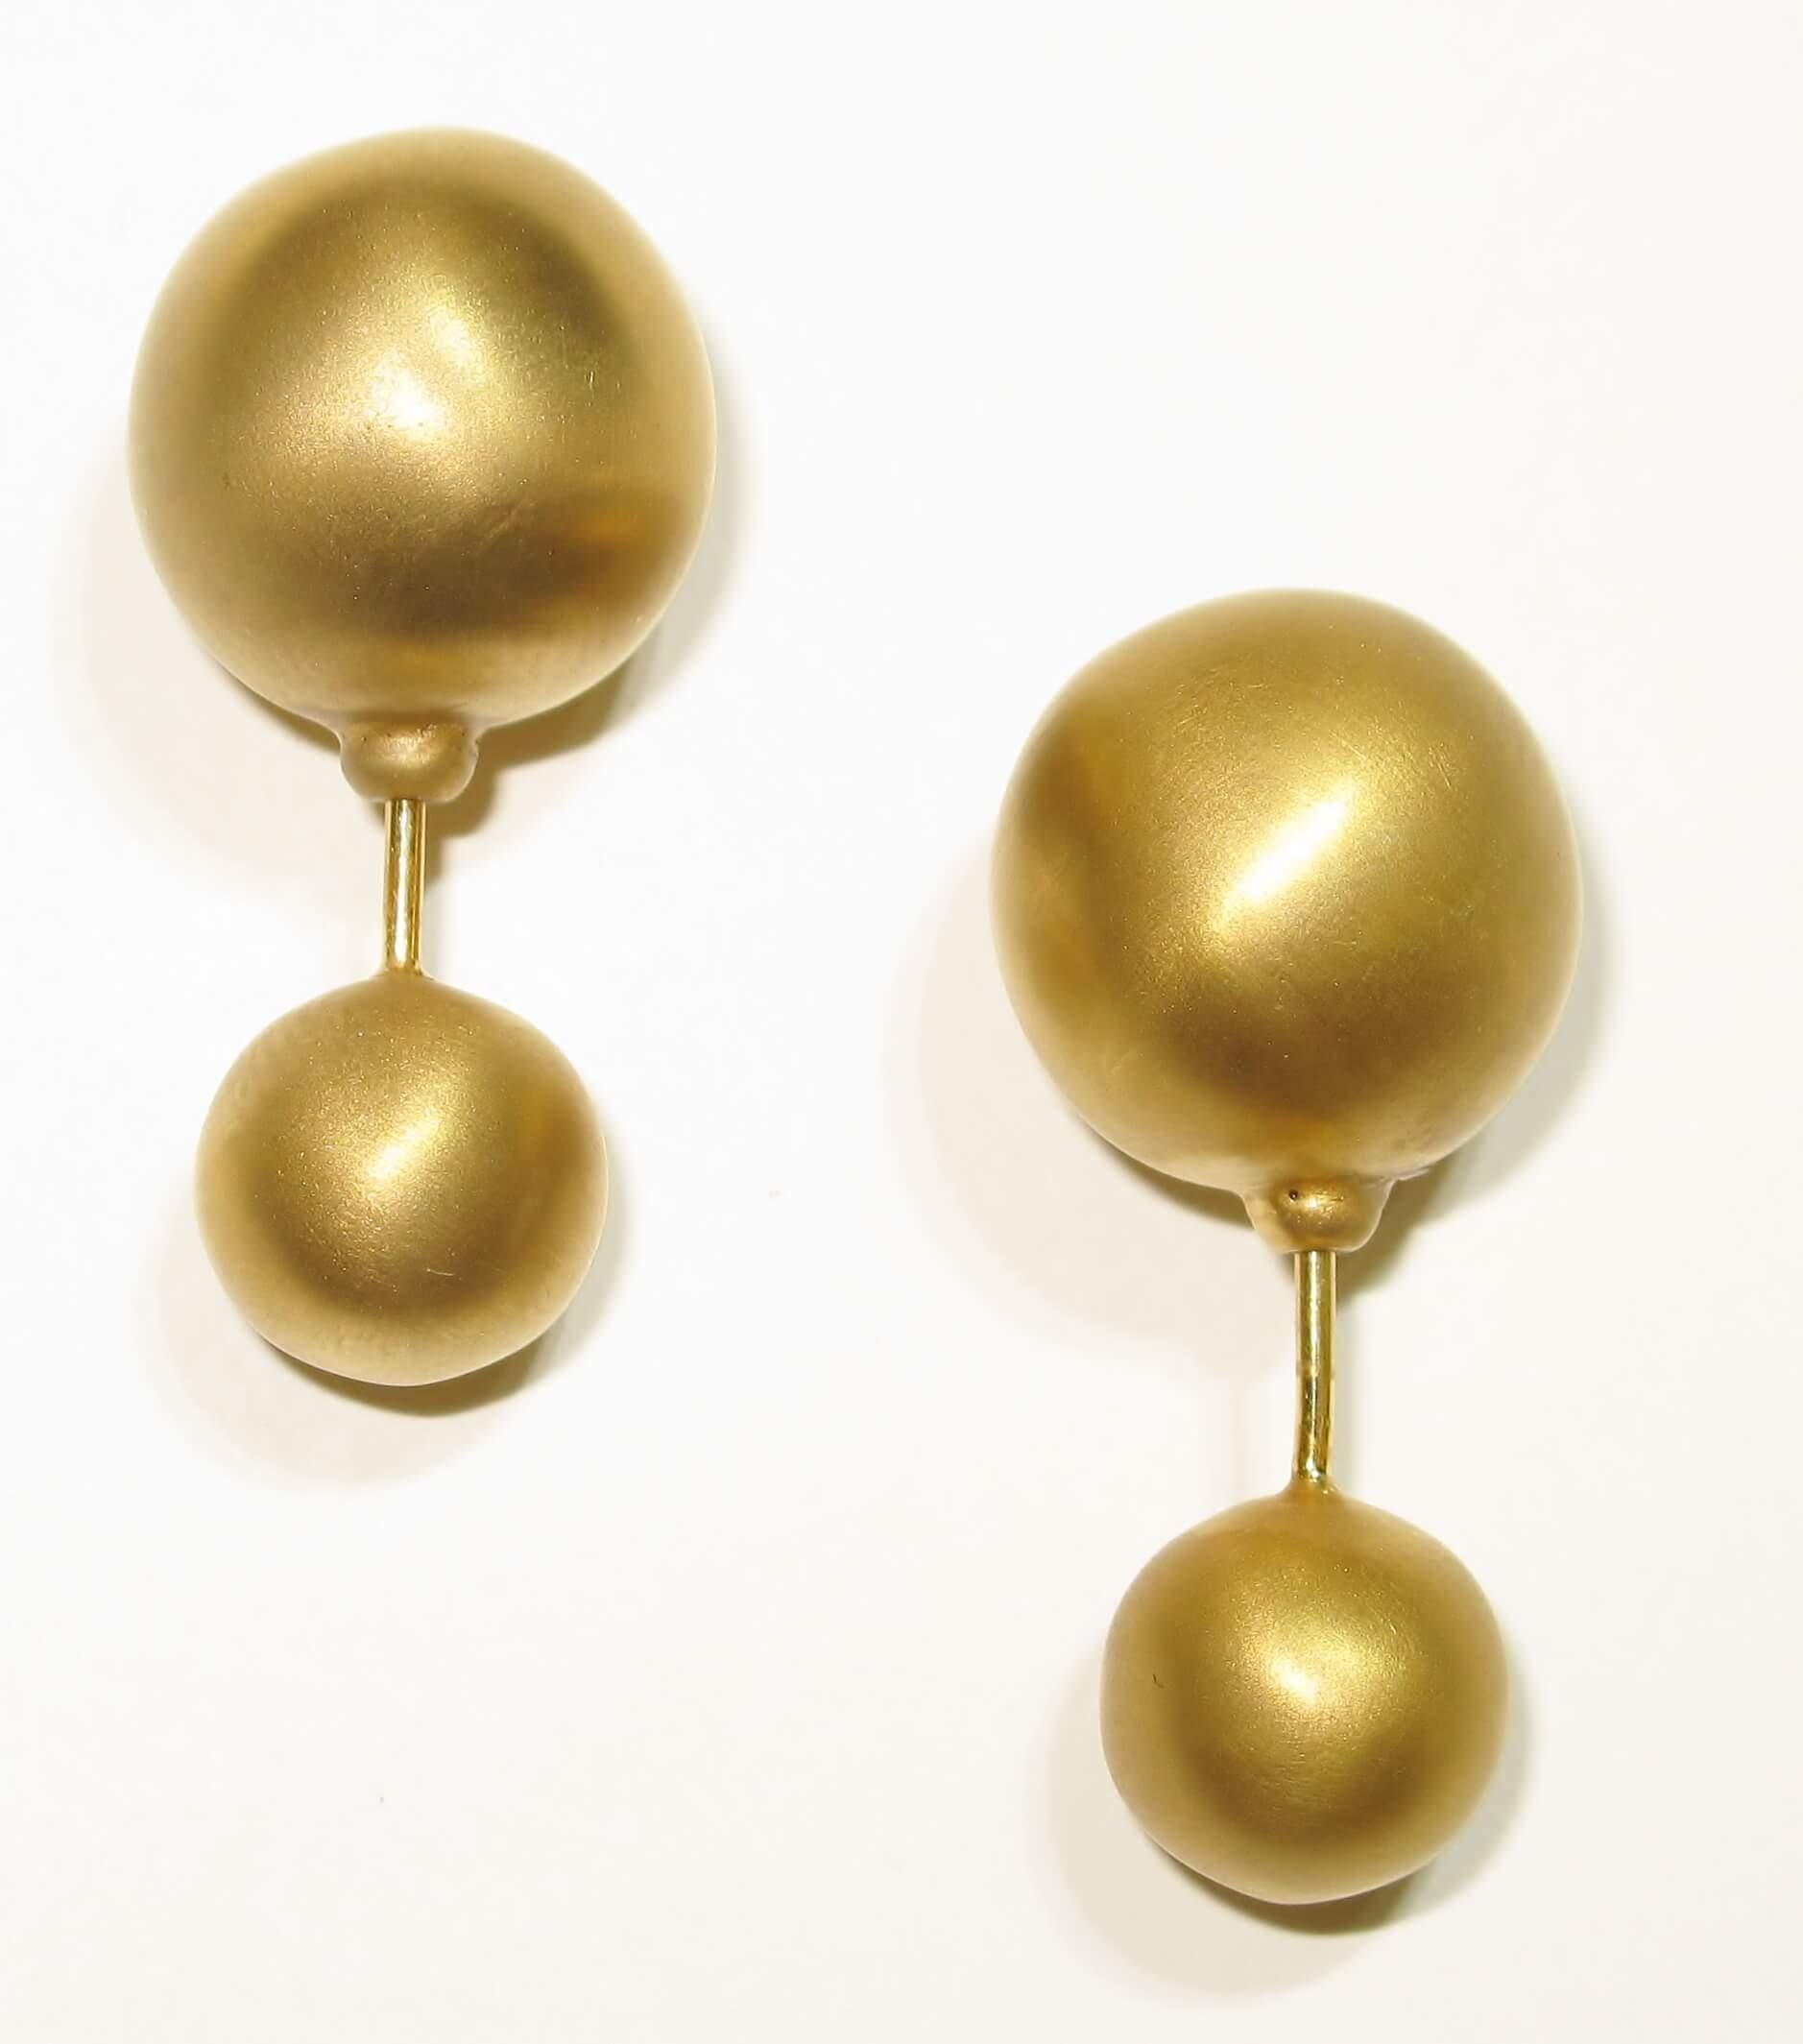 Art Nouveau Luxurious 18k Satin finish gold ball tunnel earring For Sale